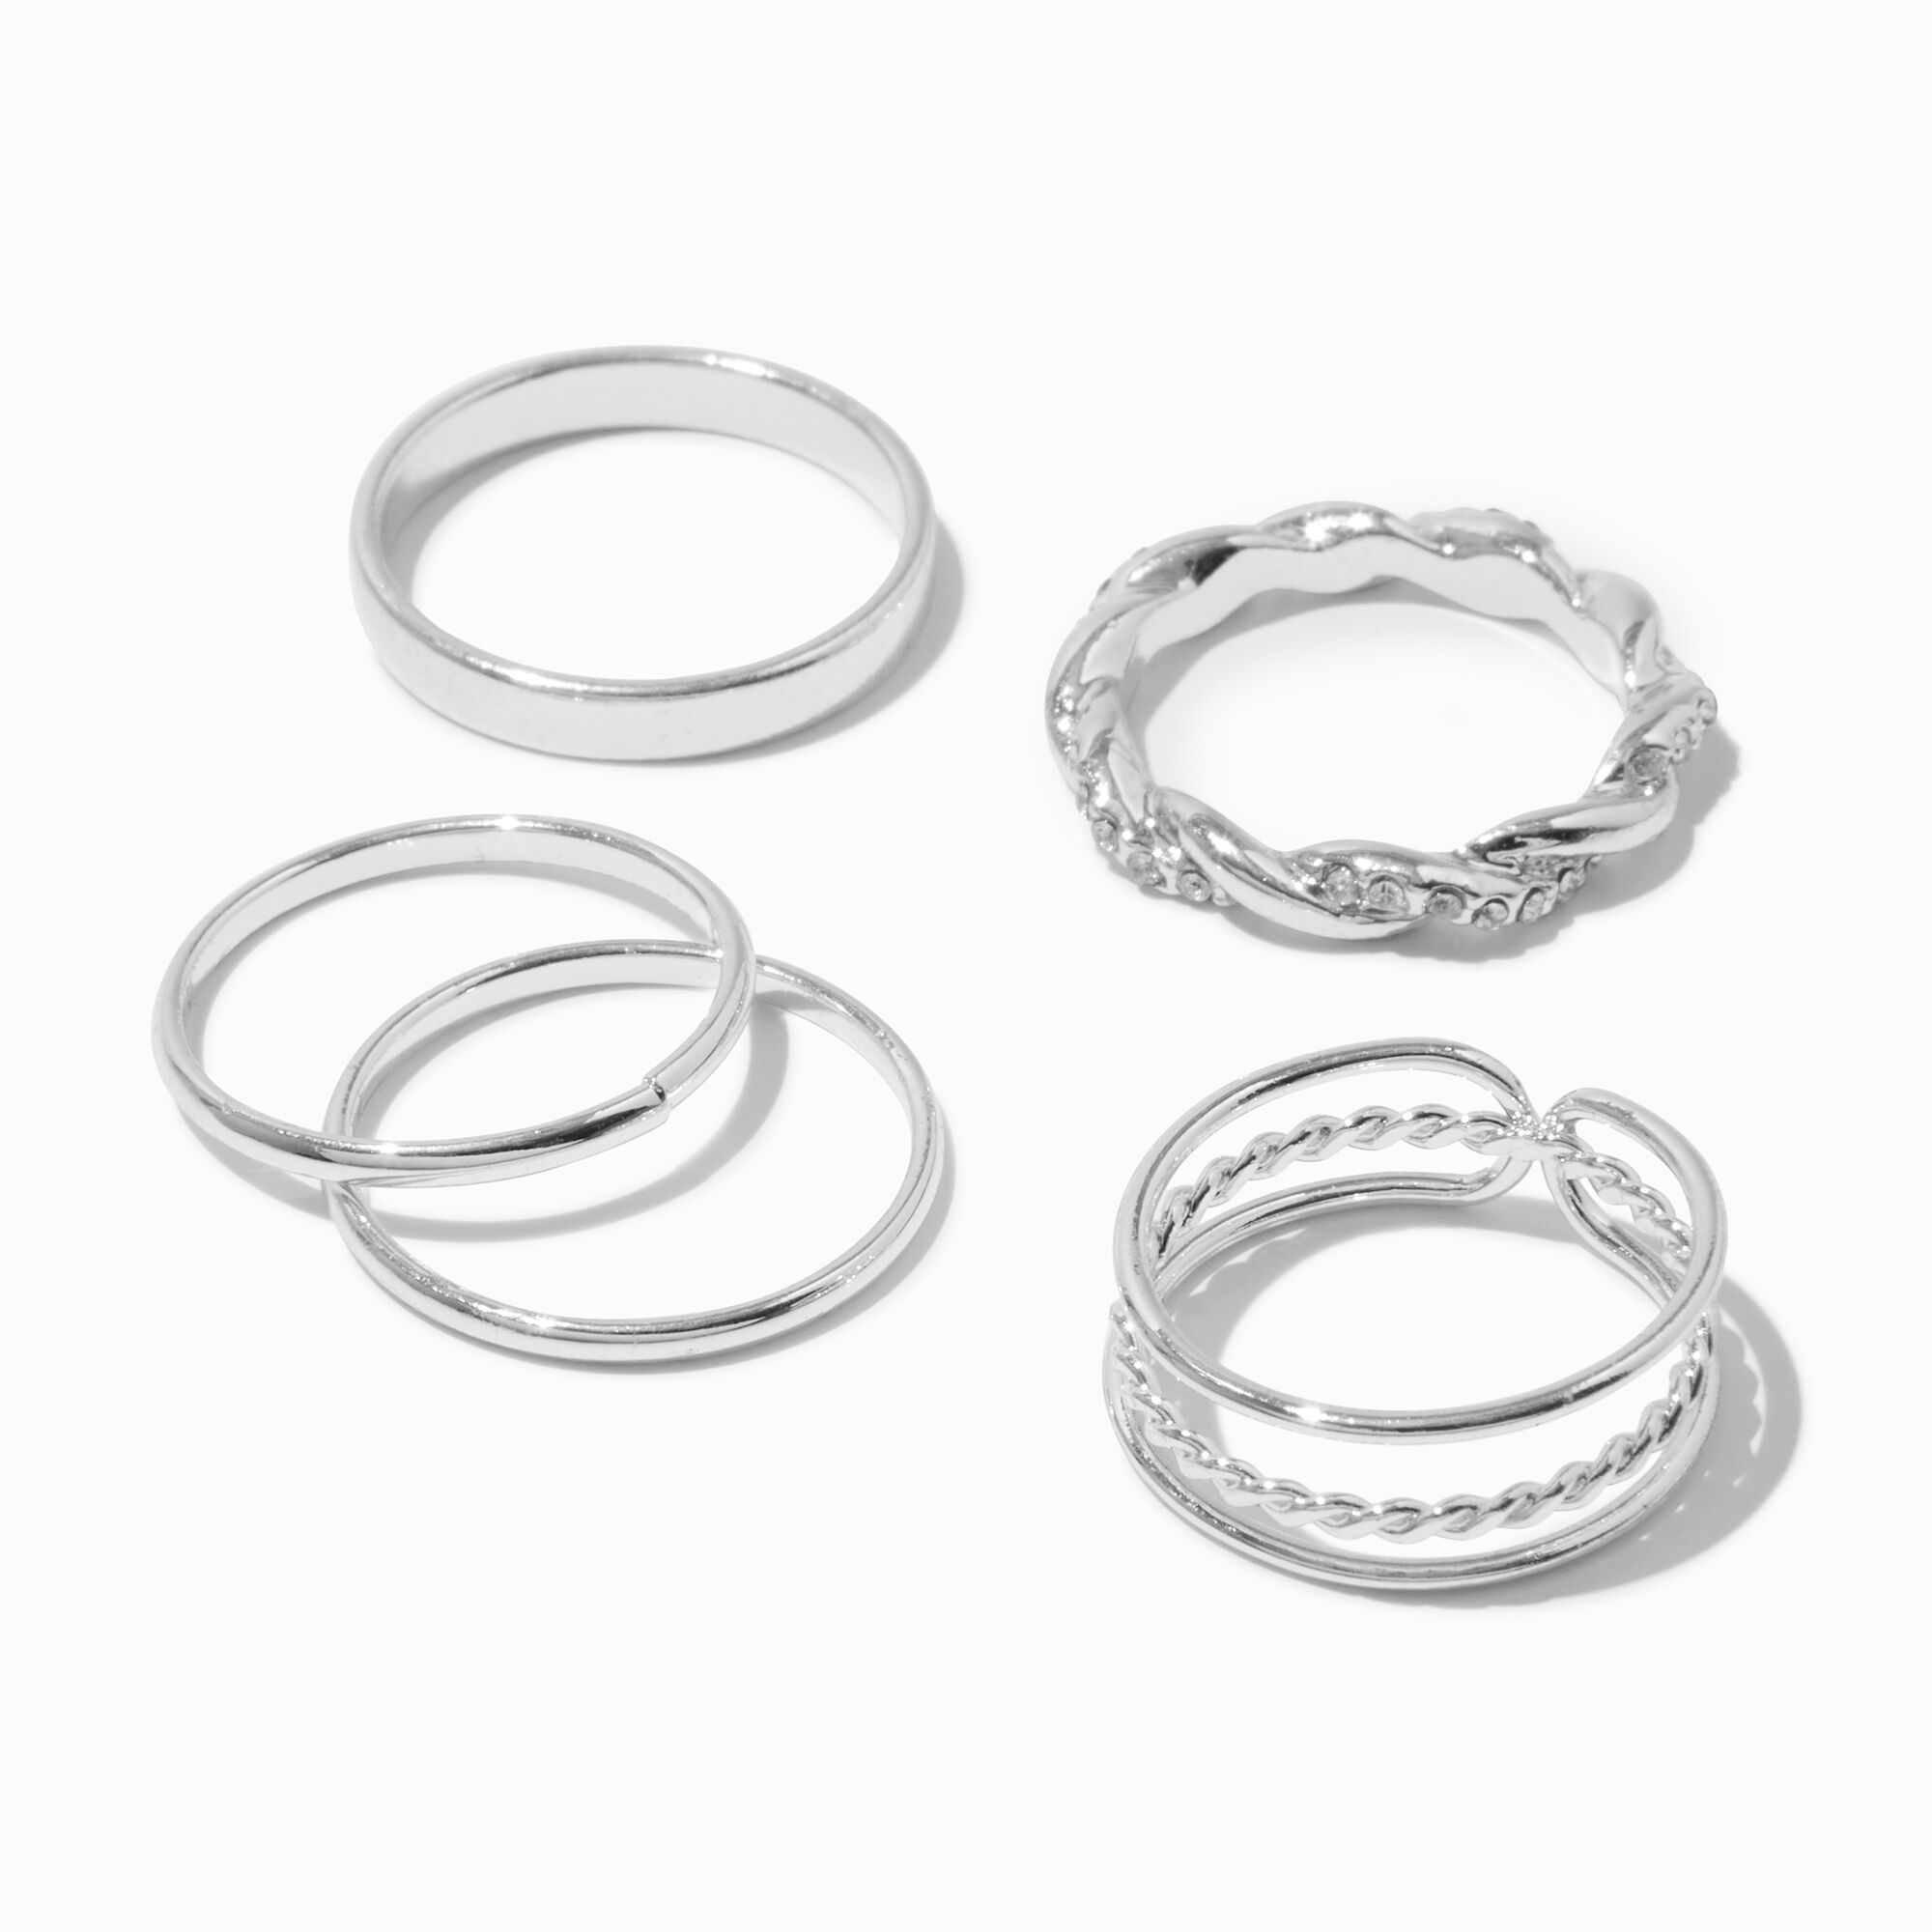 View Claires Tone Twisted Geometric Rings 4 Pack Silver information